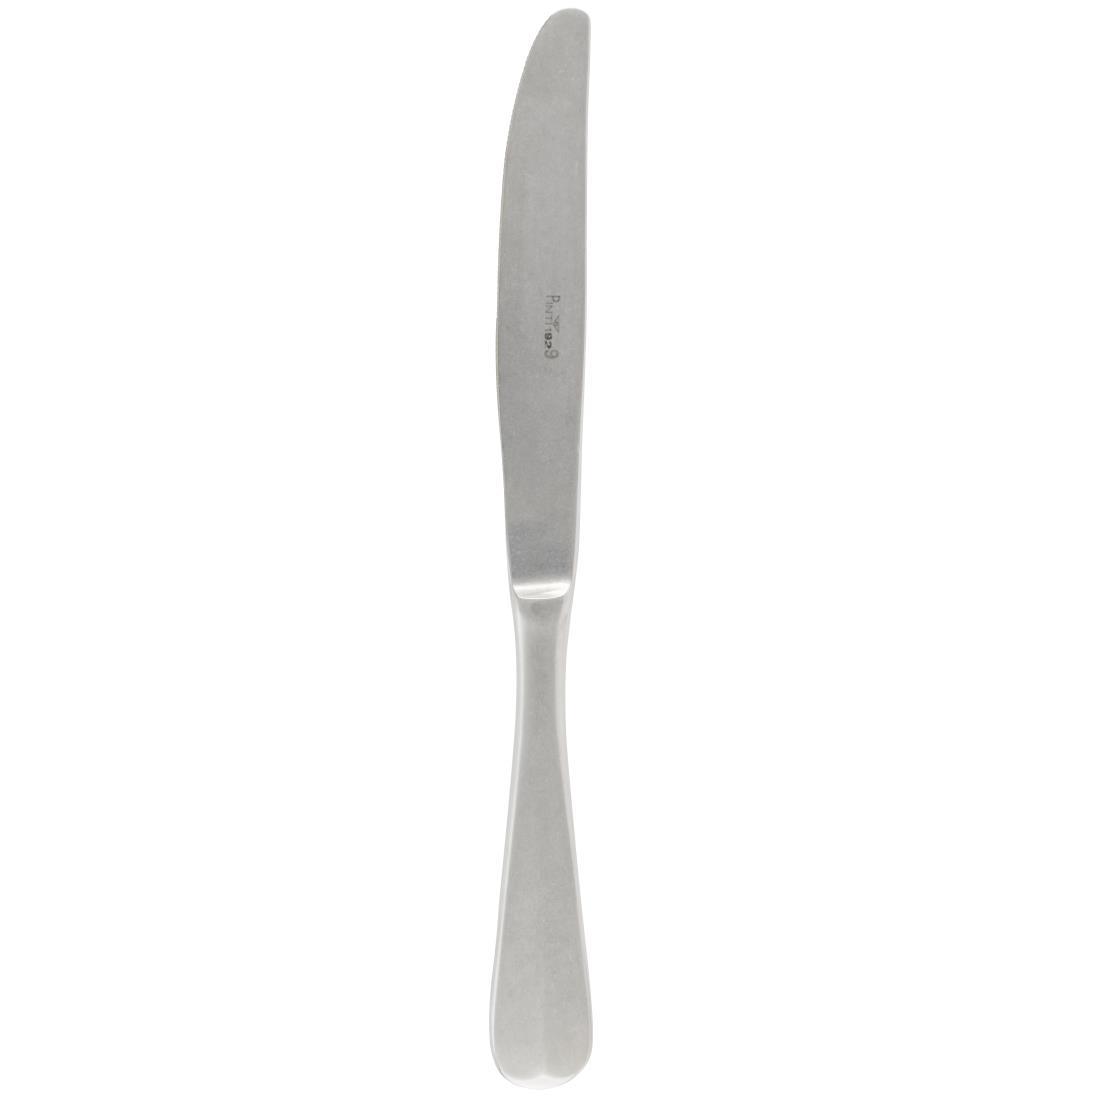 Pintinox Baguette Stonewashed Dessert Knife (Pack of 12) - GN785  - 2